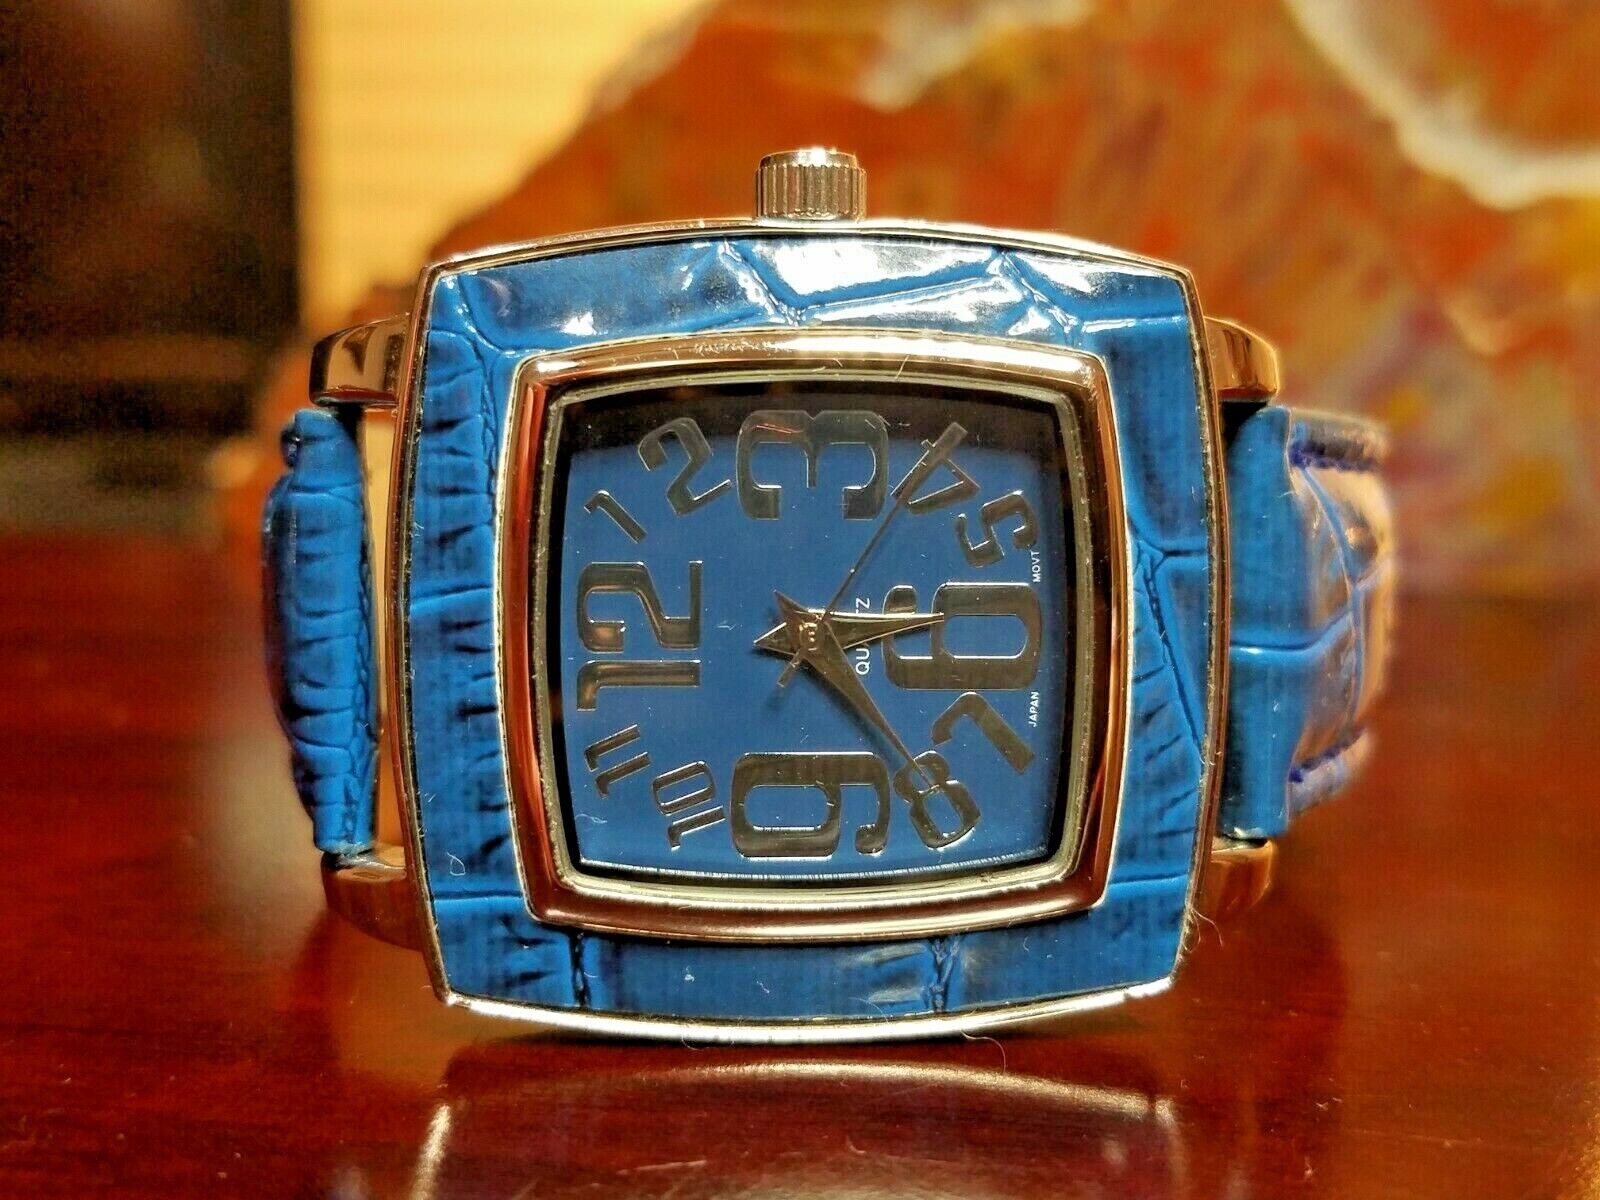 Silver Tone BWC Watch, Square Blue Face, Blue Leather Band